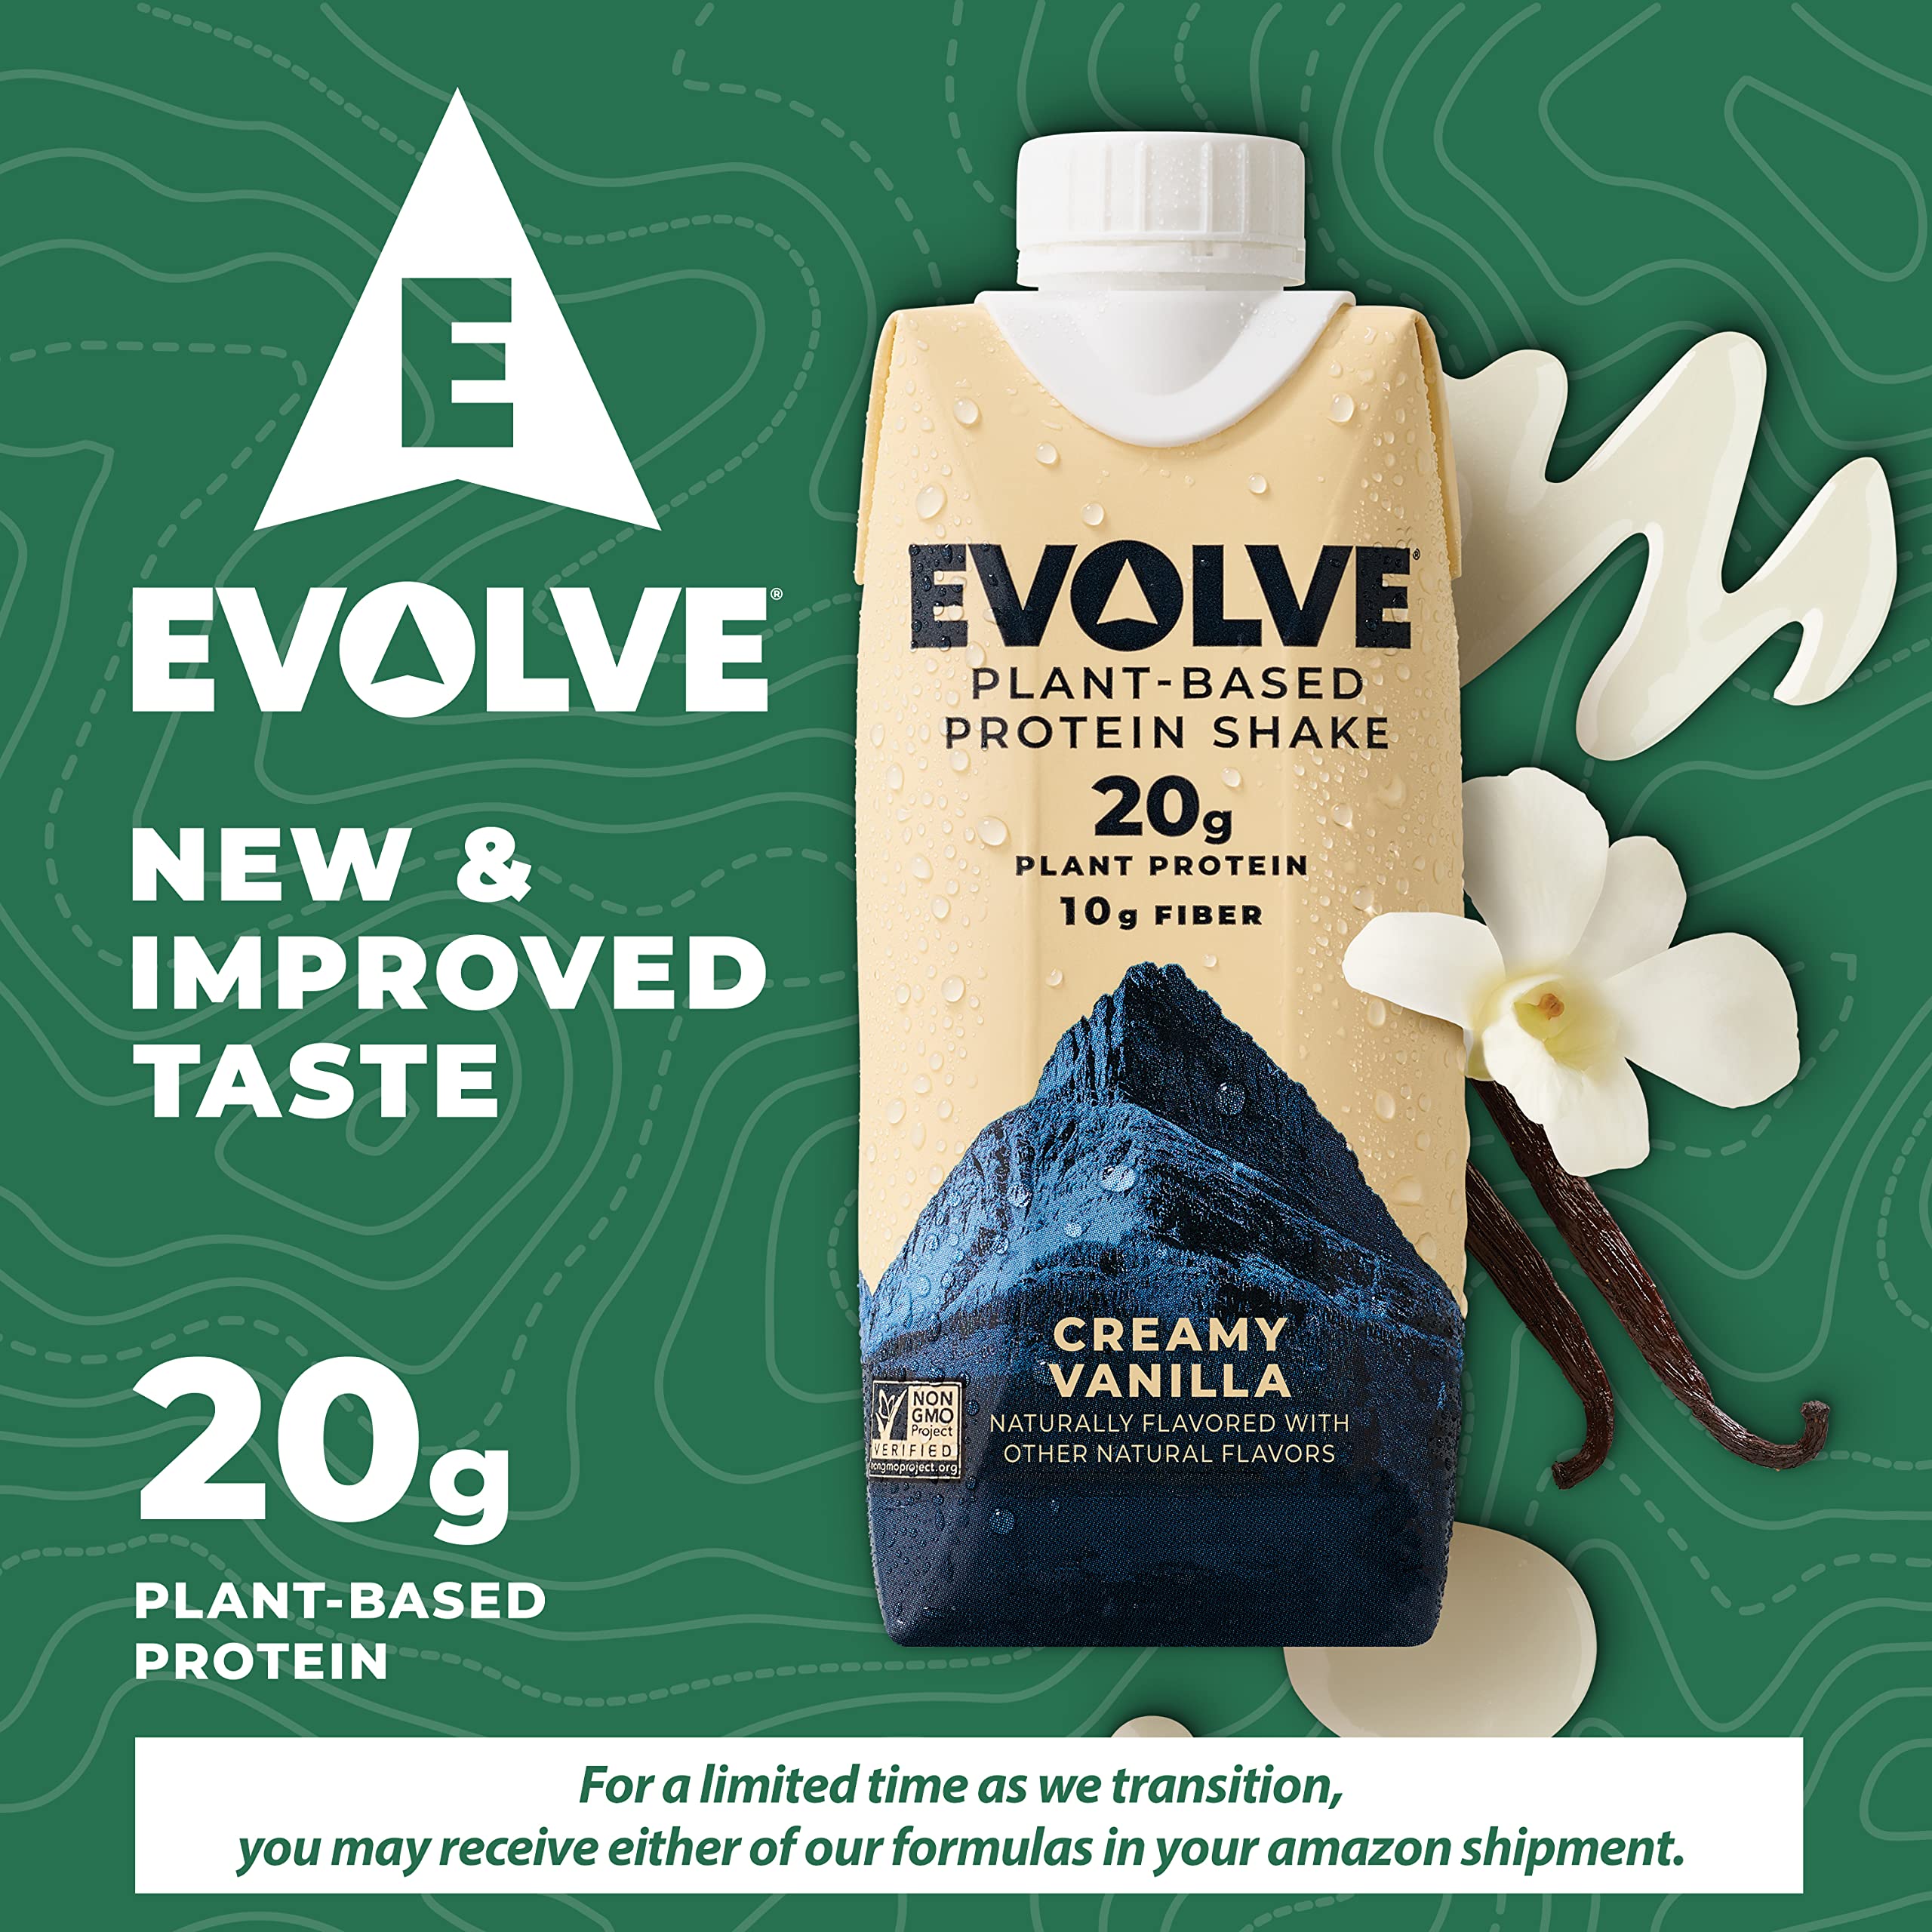 Evolve Plant Based Protein Shake, Vanilla Bean, 20g Vegan Protein, Dairy Free, No Artificial Sweeteners, Non-GMO, 10g Fiber, 11 Fl Oz (Pack of 12) (Formula May Vary)